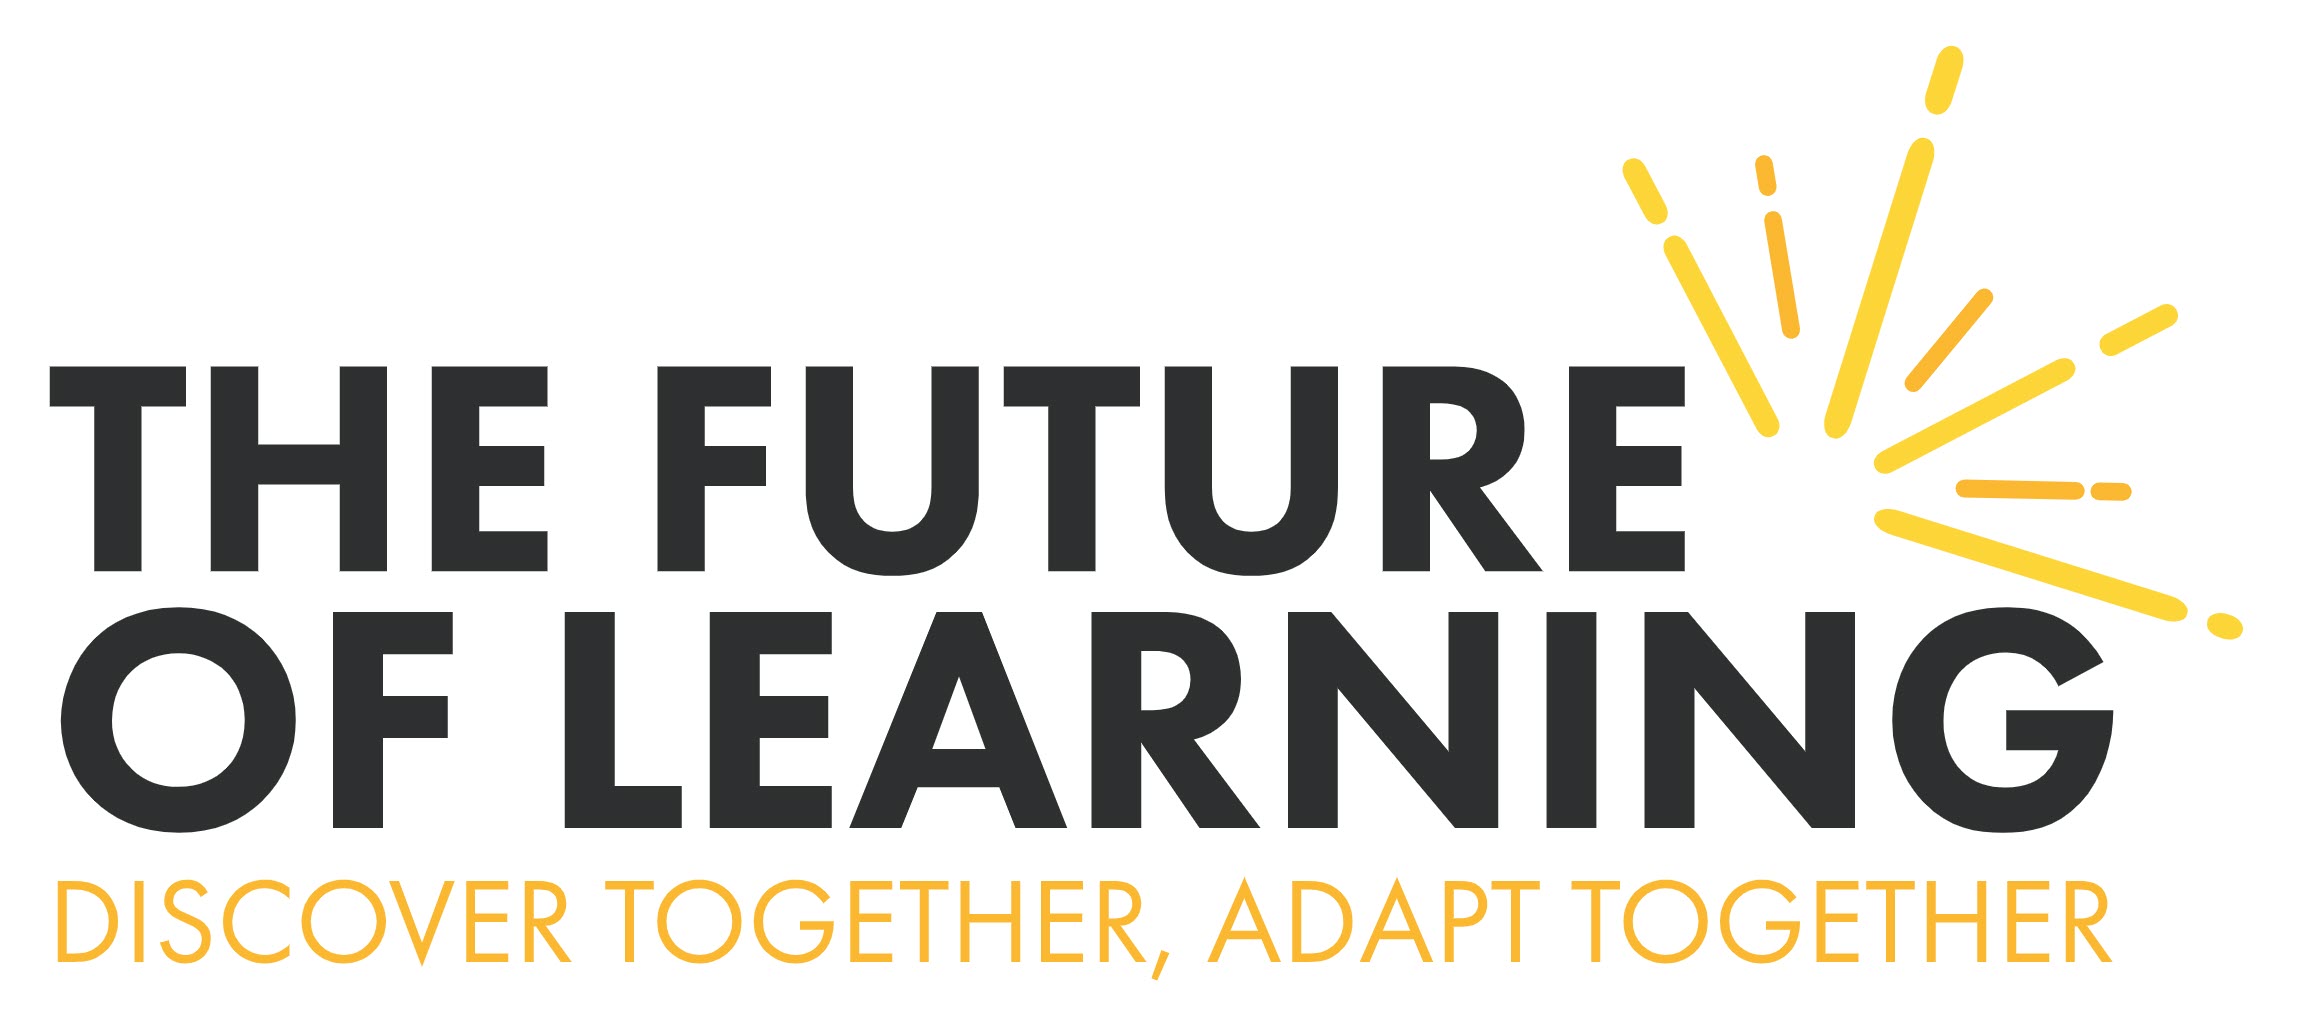 2021-2022 Theme: The Future of Learning